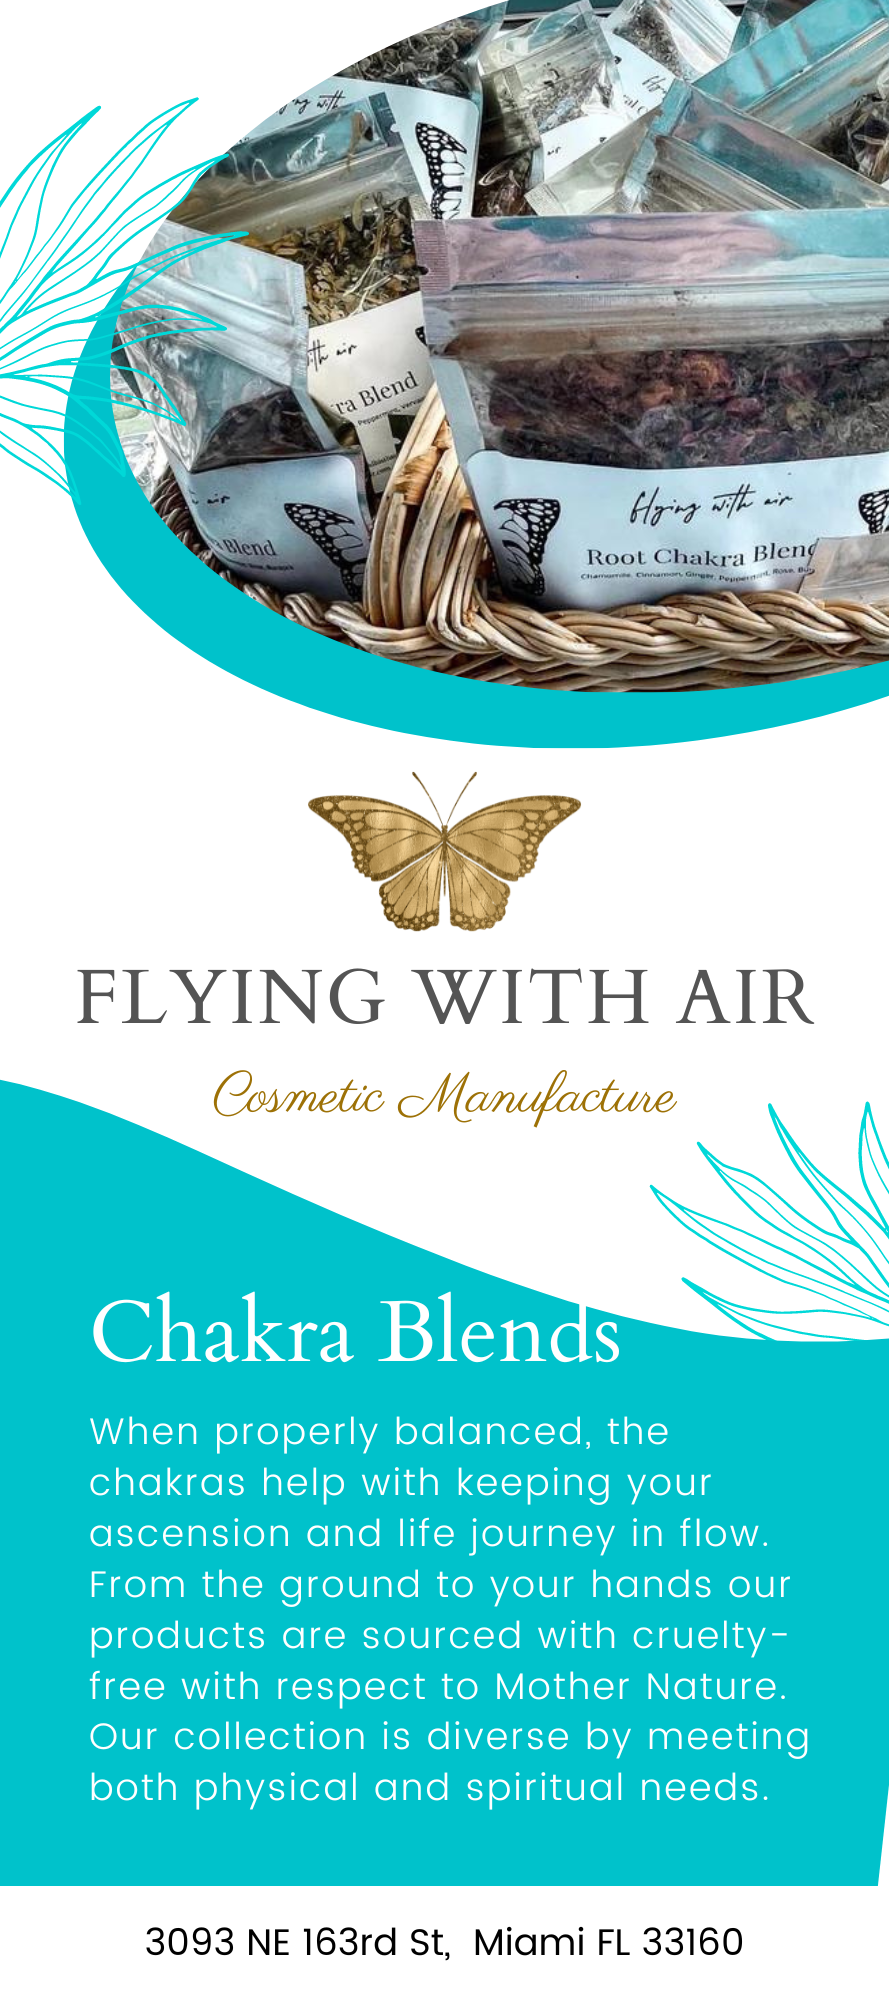 Flying with Air Rack Card Set of 10 - Chakra Blends